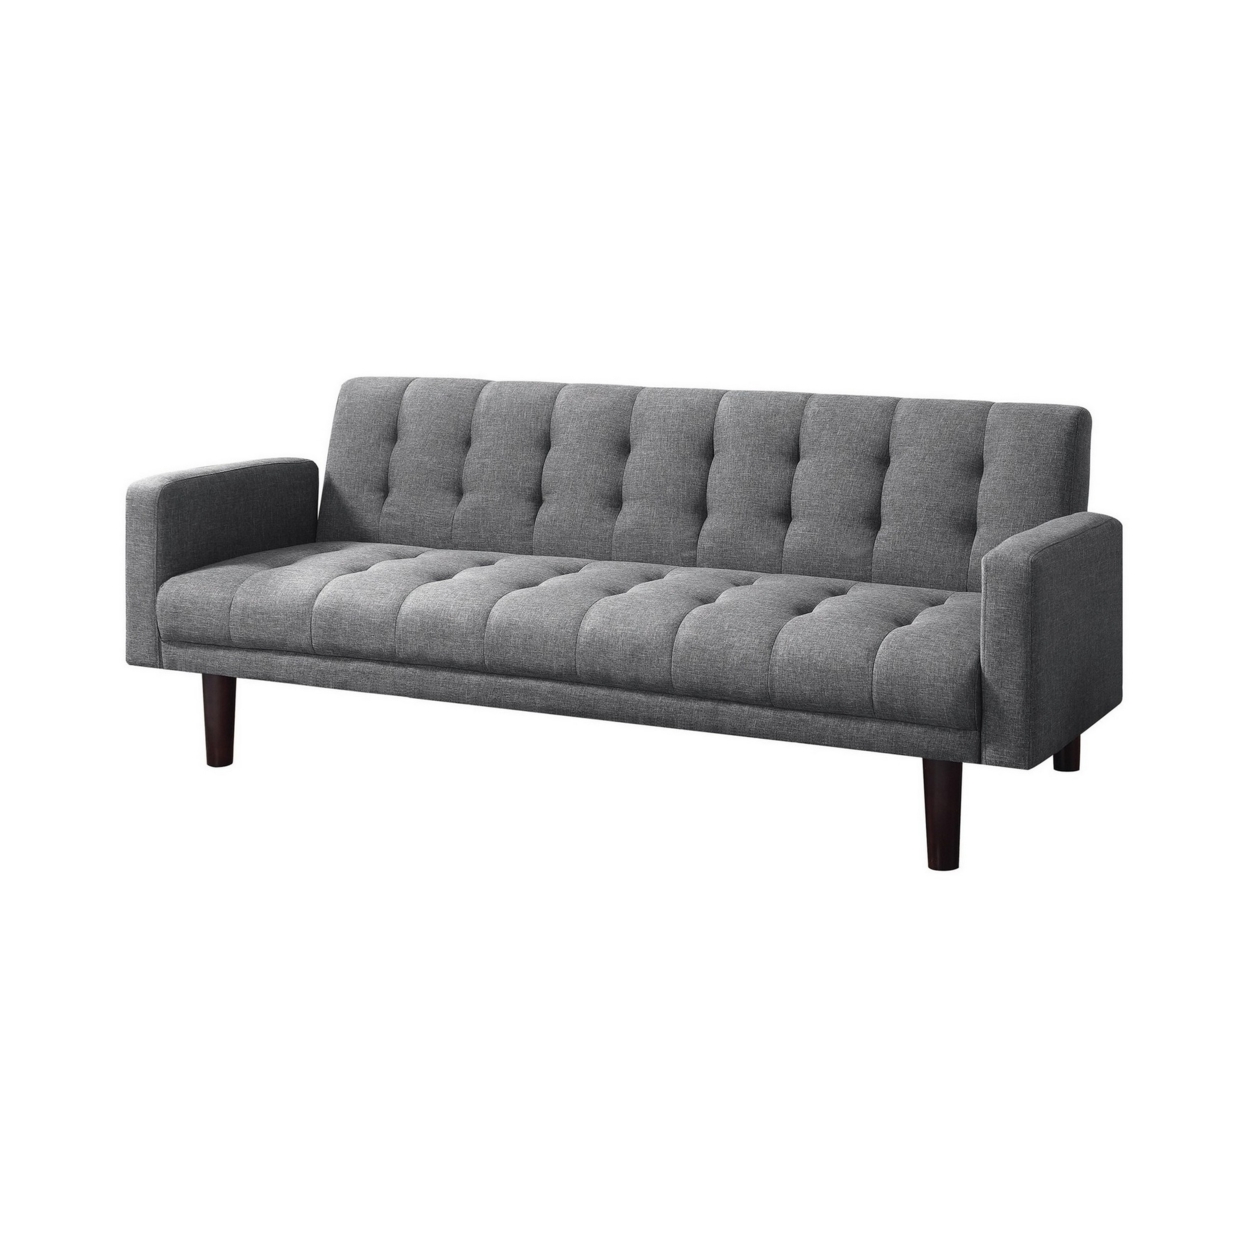 74 Inch Sofa Bed, Tufted Gray Linen Like Fabric, Track Arms, Hardwood Frame